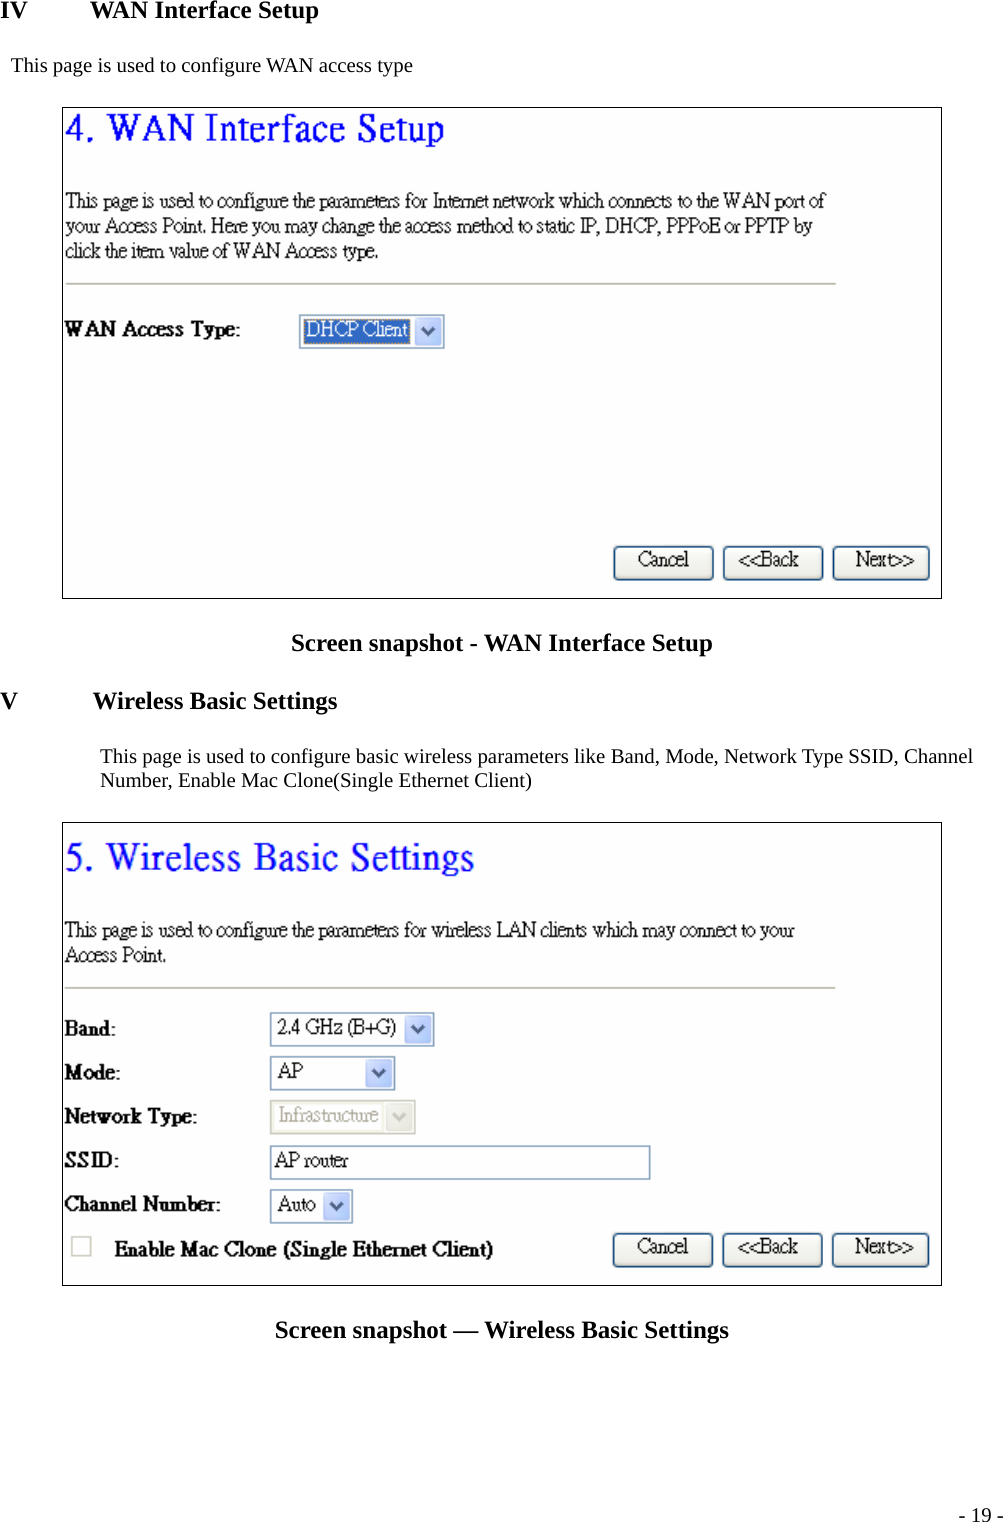 IV     WAN Interface Setup   This page is used to configure WAN access type  Screen snapshot - WAN Interface Setup V      Wireless Basic Settings This page is used to configure basic wireless parameters like Band, Mode, Network Type SSID, Channel Number, Enable Mac Clone(Single Ethernet Client)  Screen snapshot — Wireless Basic Settings   - 19 -